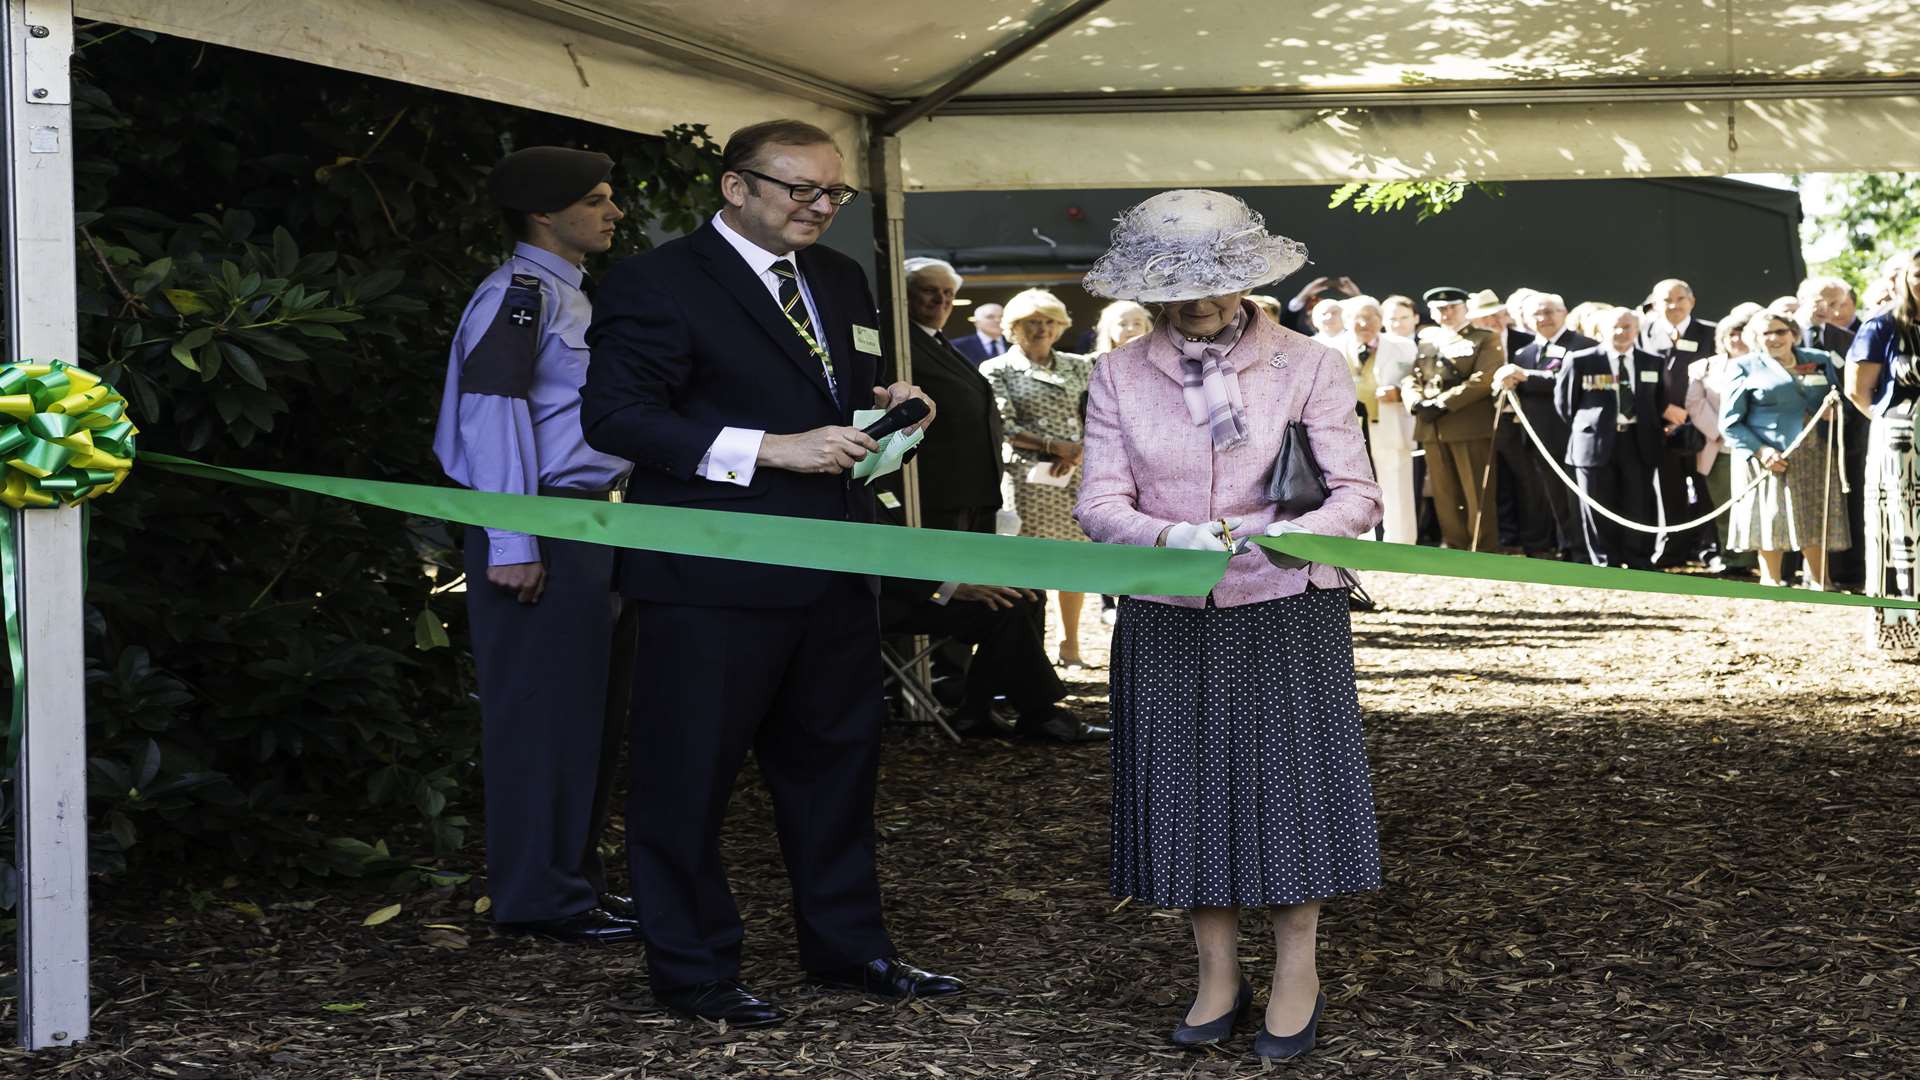 Princess Alexandra officially opened the military museum